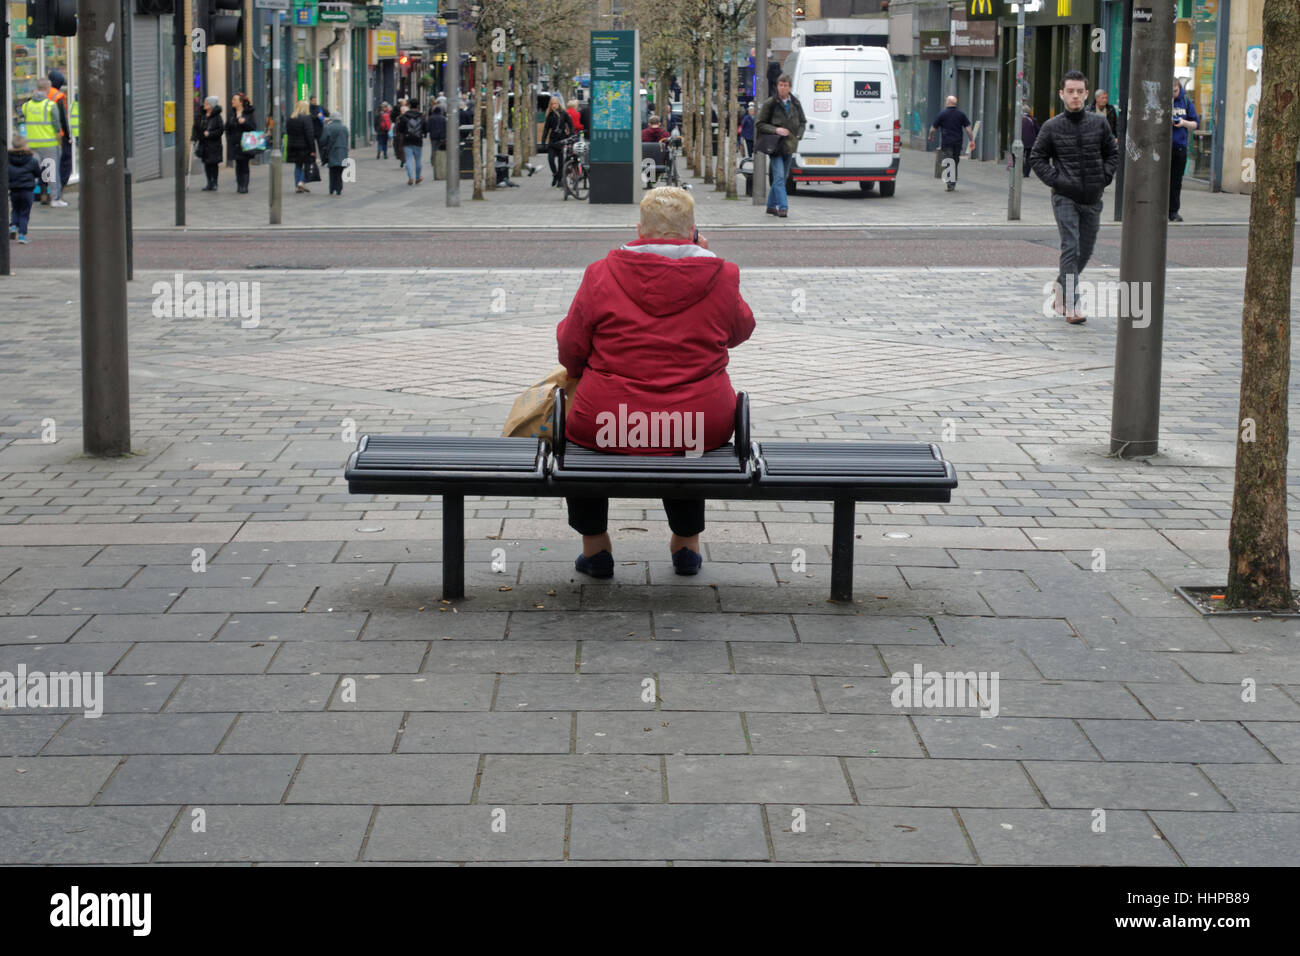 old large lady on mobile phone in red sitting on street bench Sauchiehall Street  Glasgow, Stock Photo